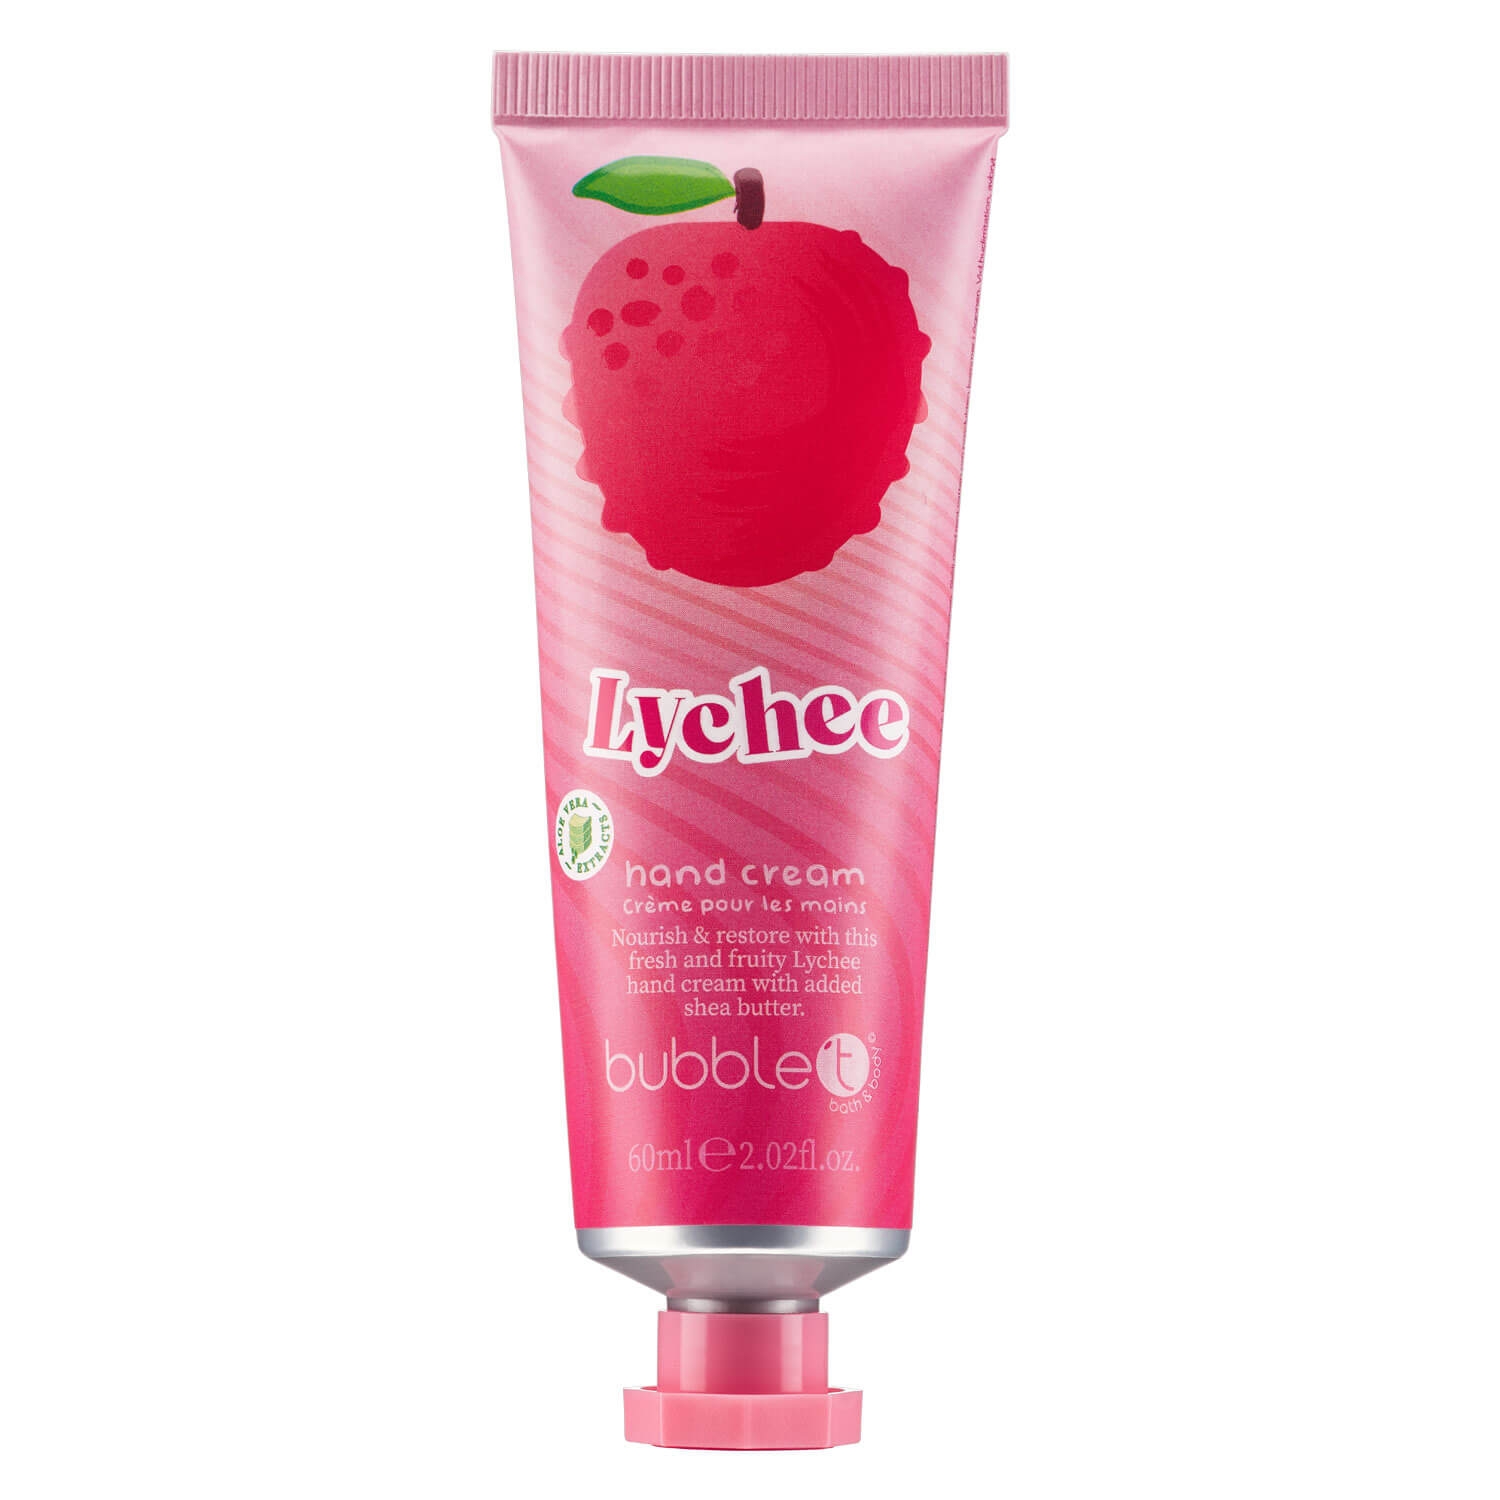 Product image from bubble t - Lychee Hand Cream